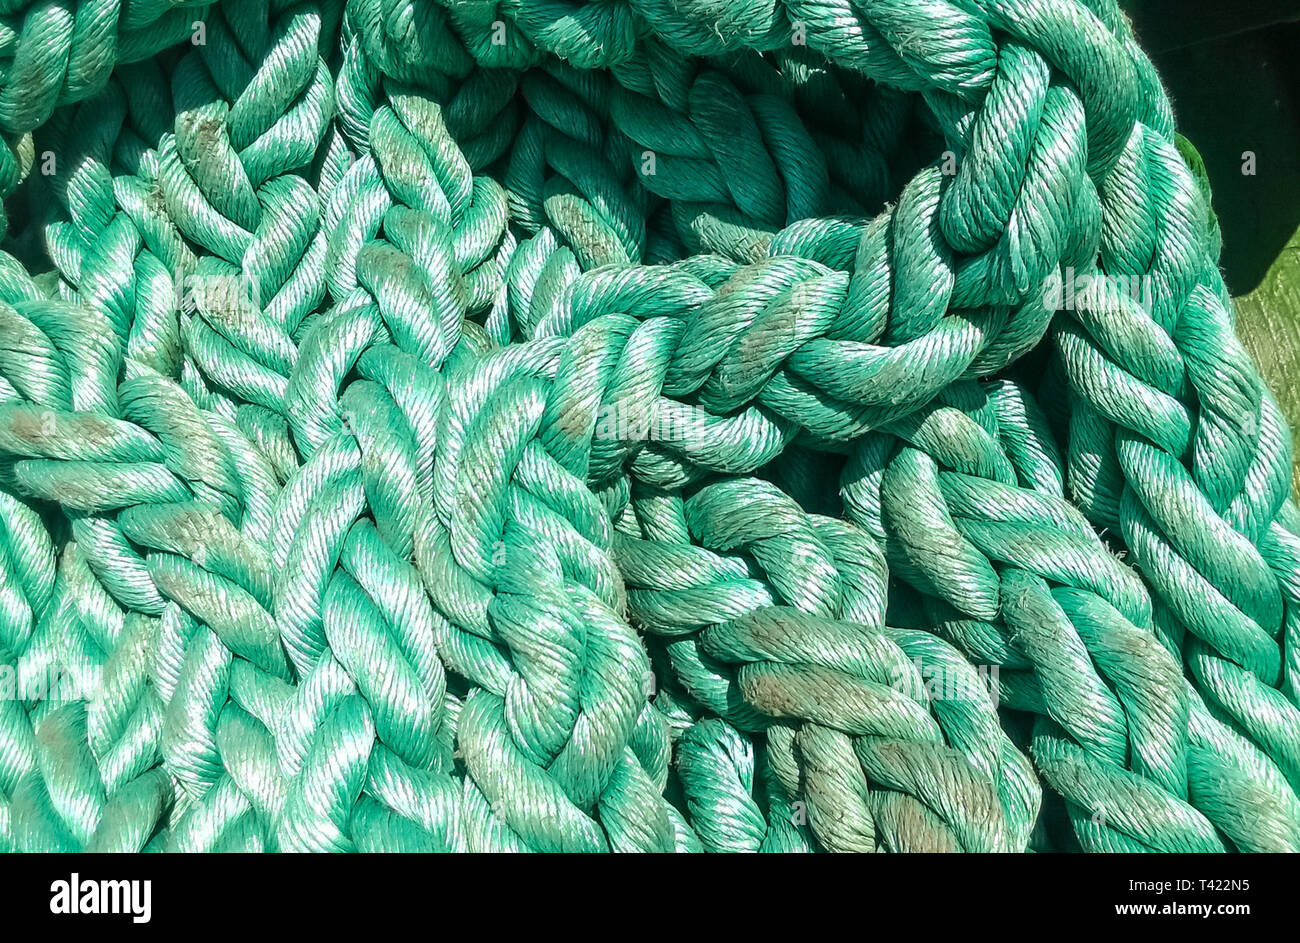 Port rope. Mooring rope. Rope for fastening ships and cargo. Stock Photo